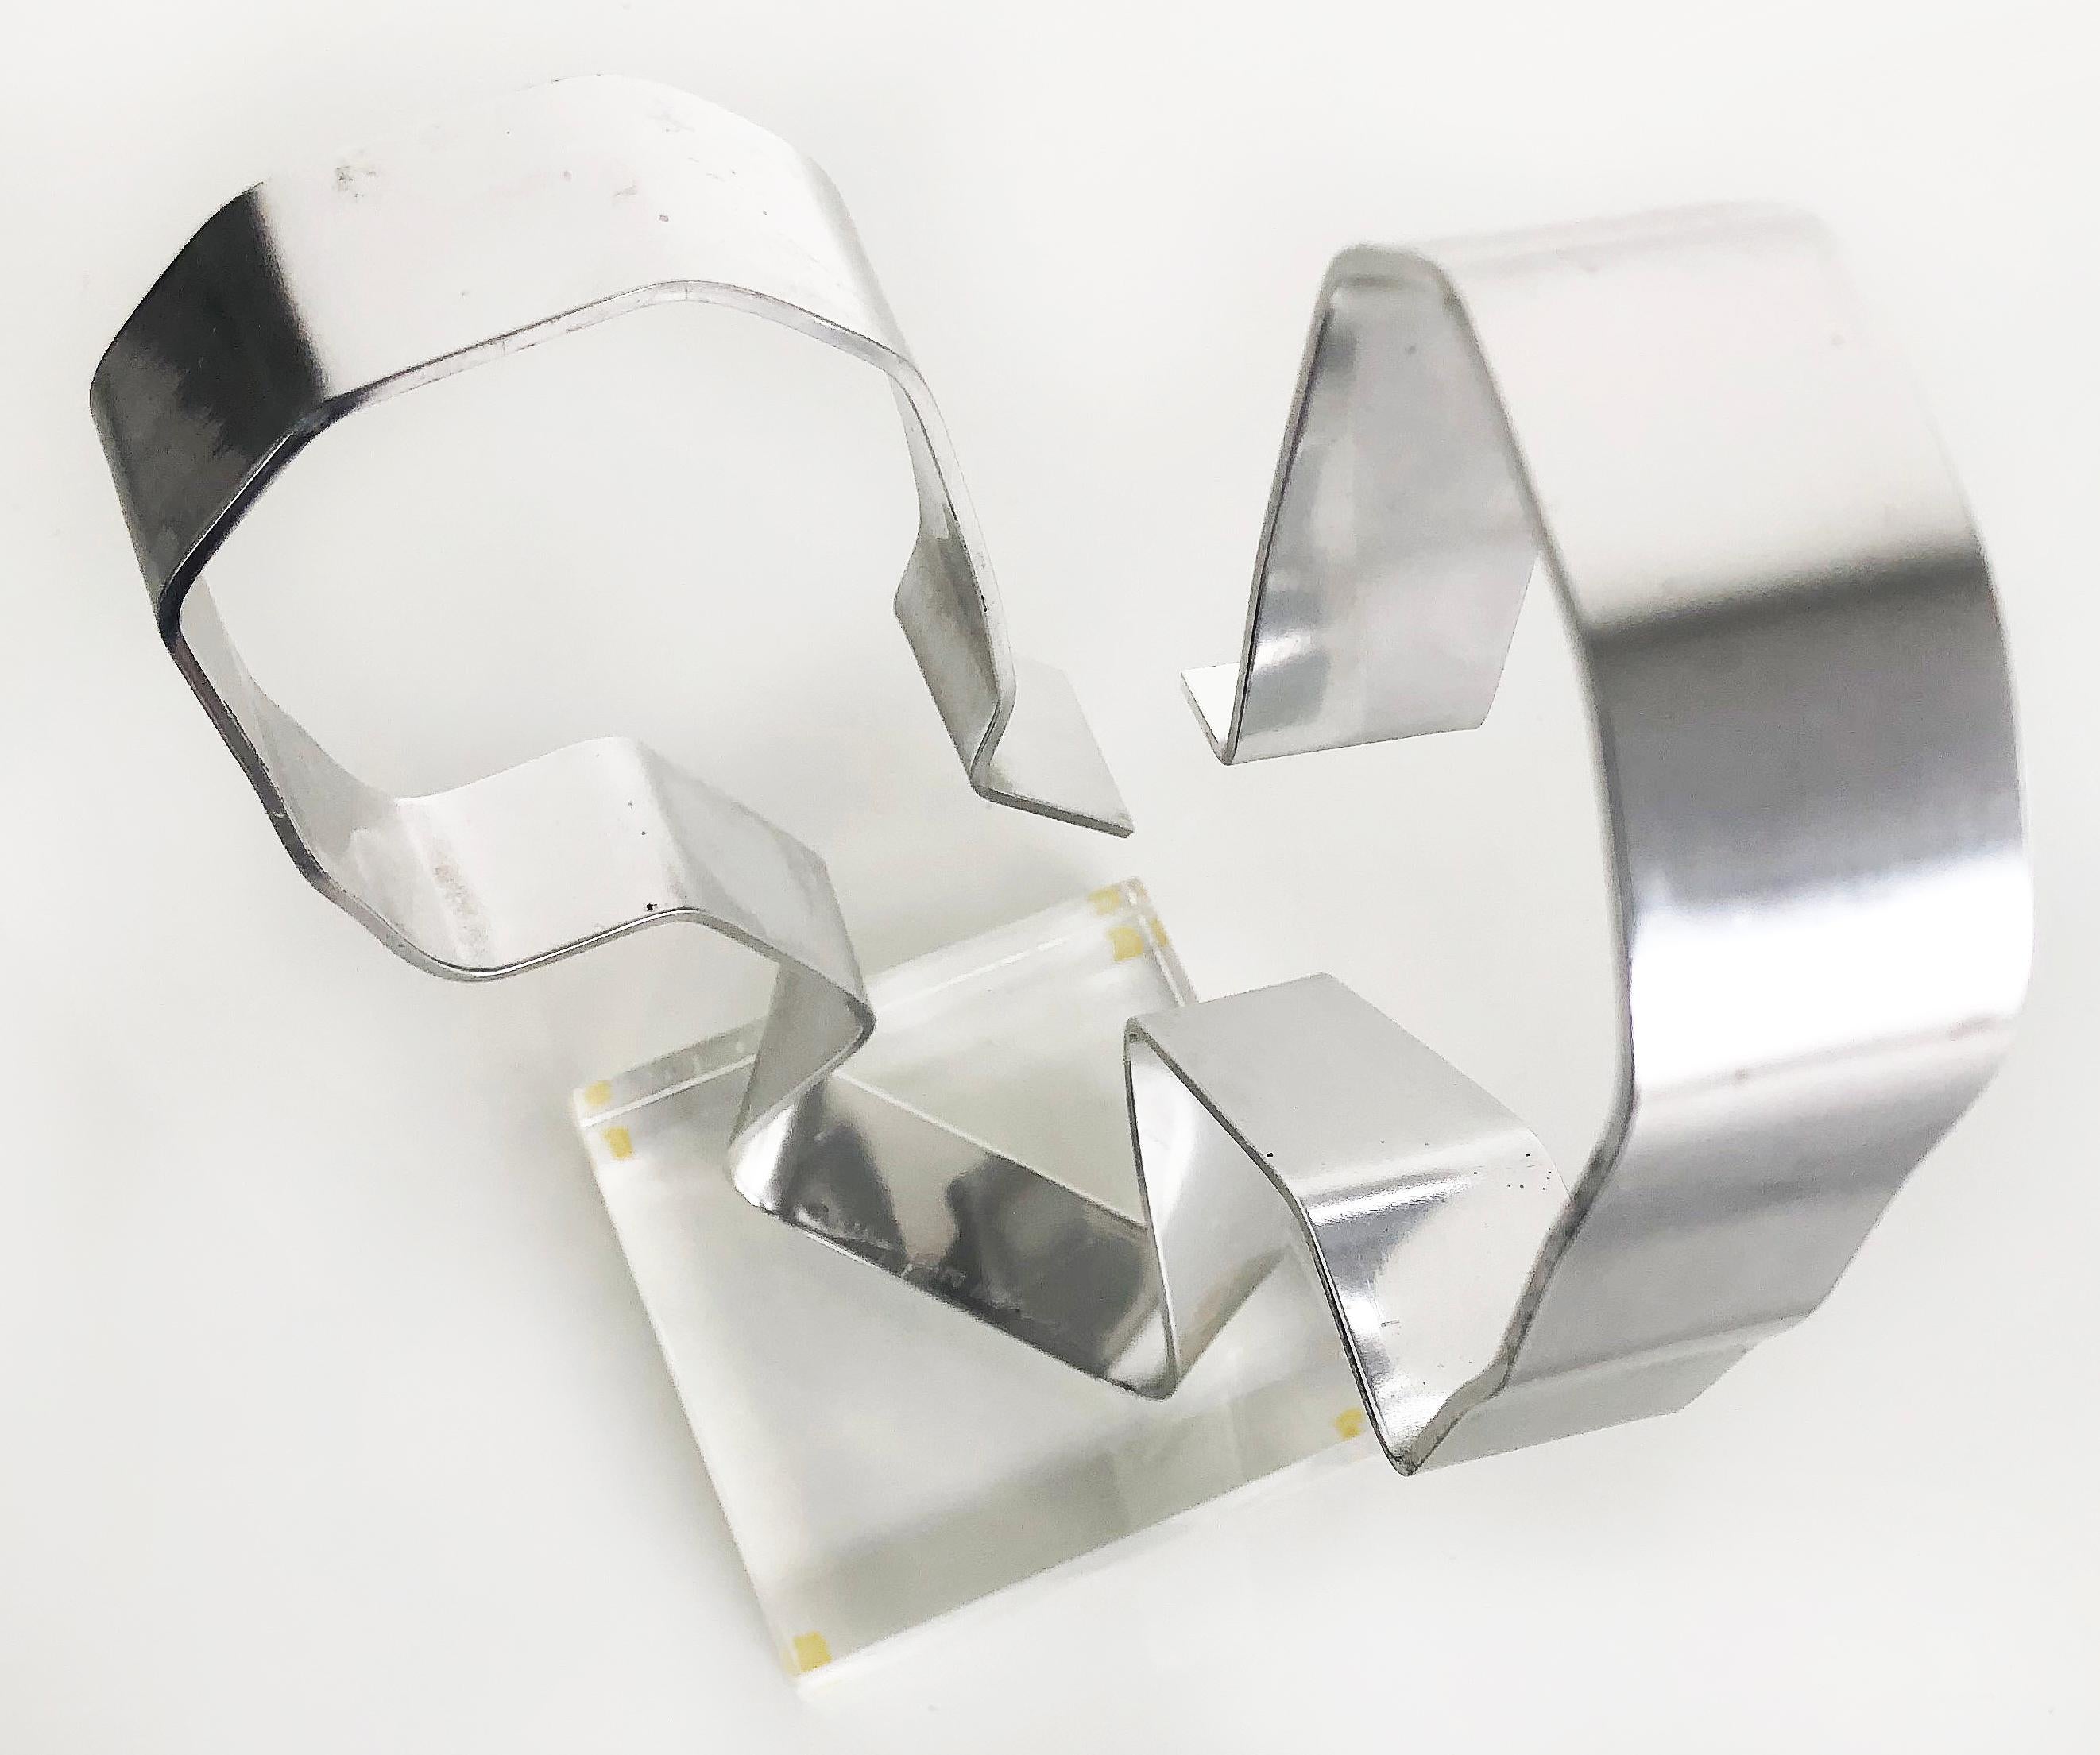 20th Century Dan Murphy Abstract Aluminum Free-form Sculpture on Lucite, Signed & Dated 1977